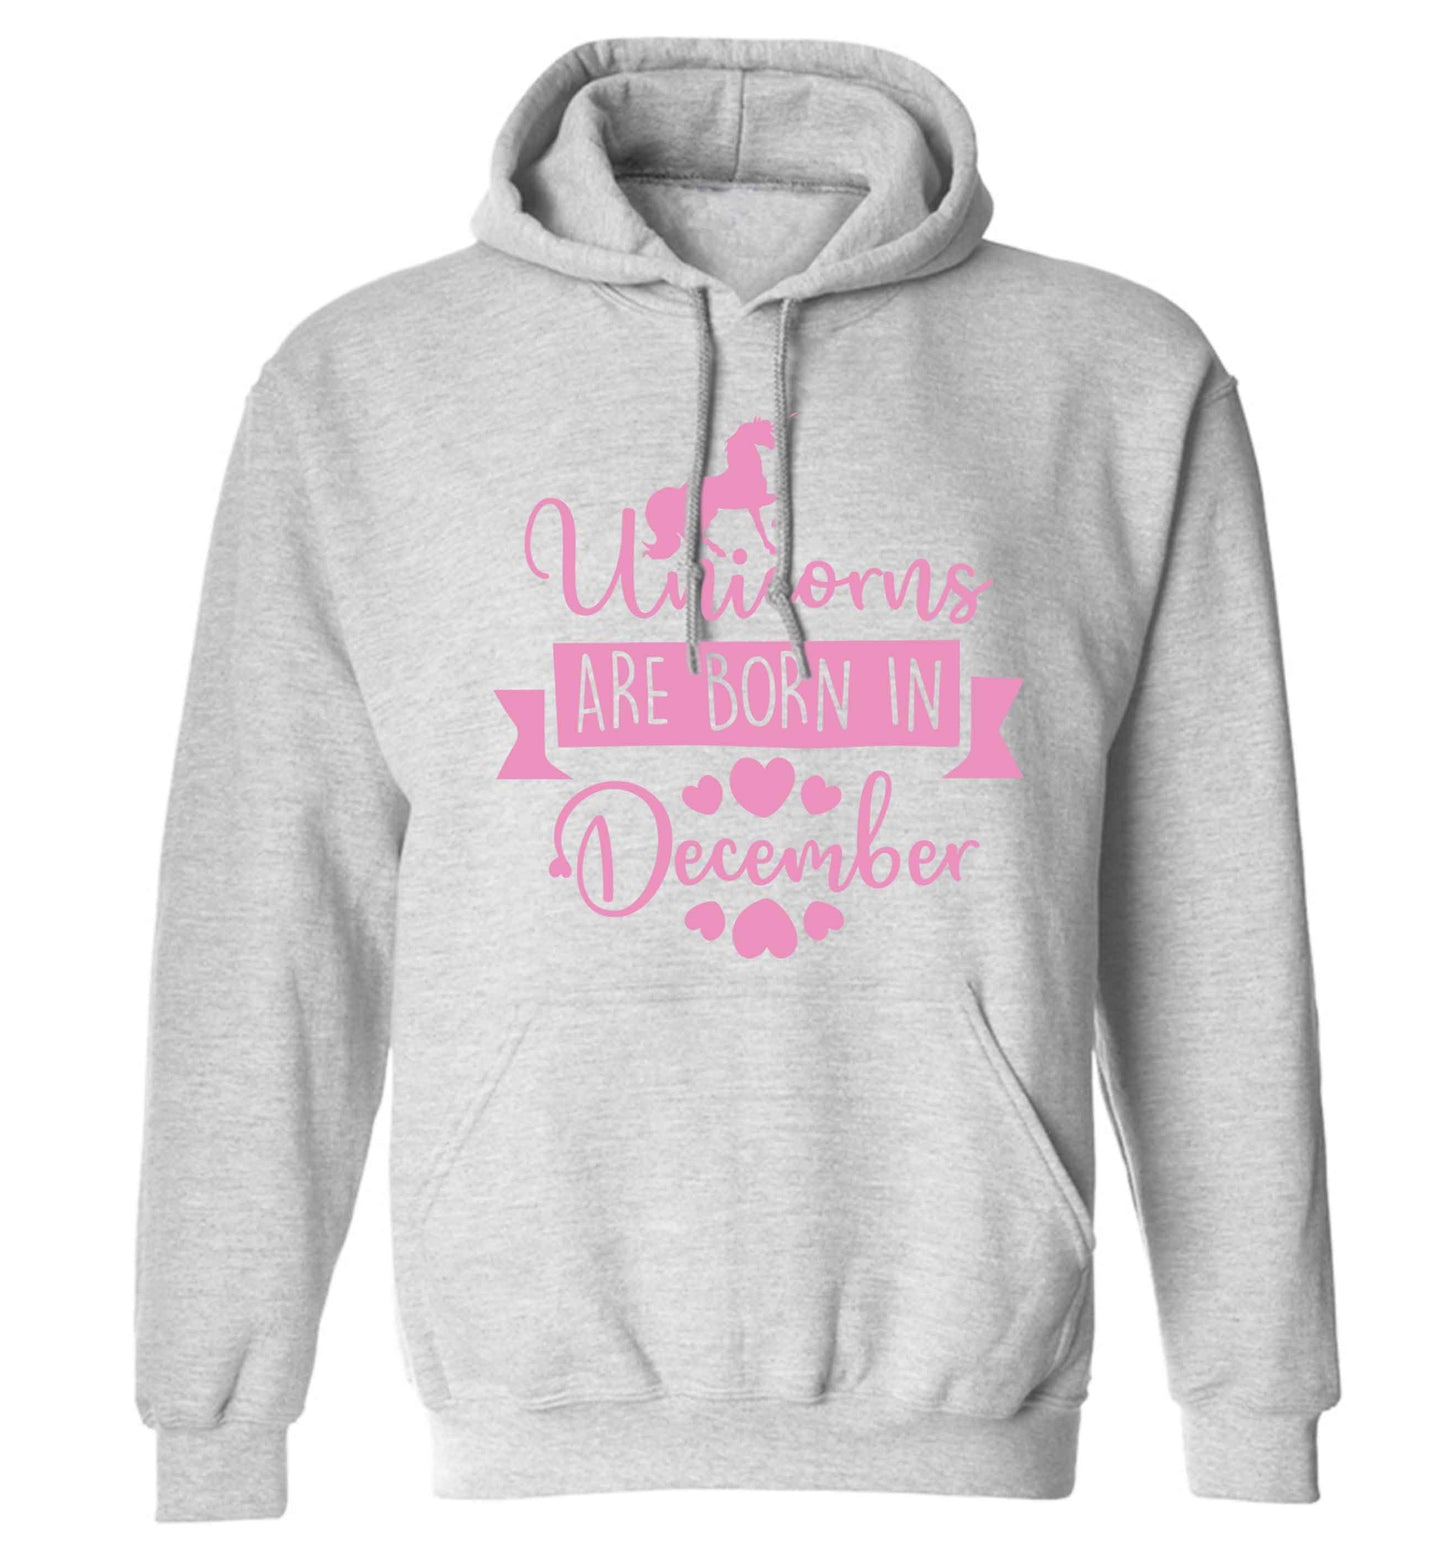 Unicorns are born in December adults unisex grey hoodie 2XL